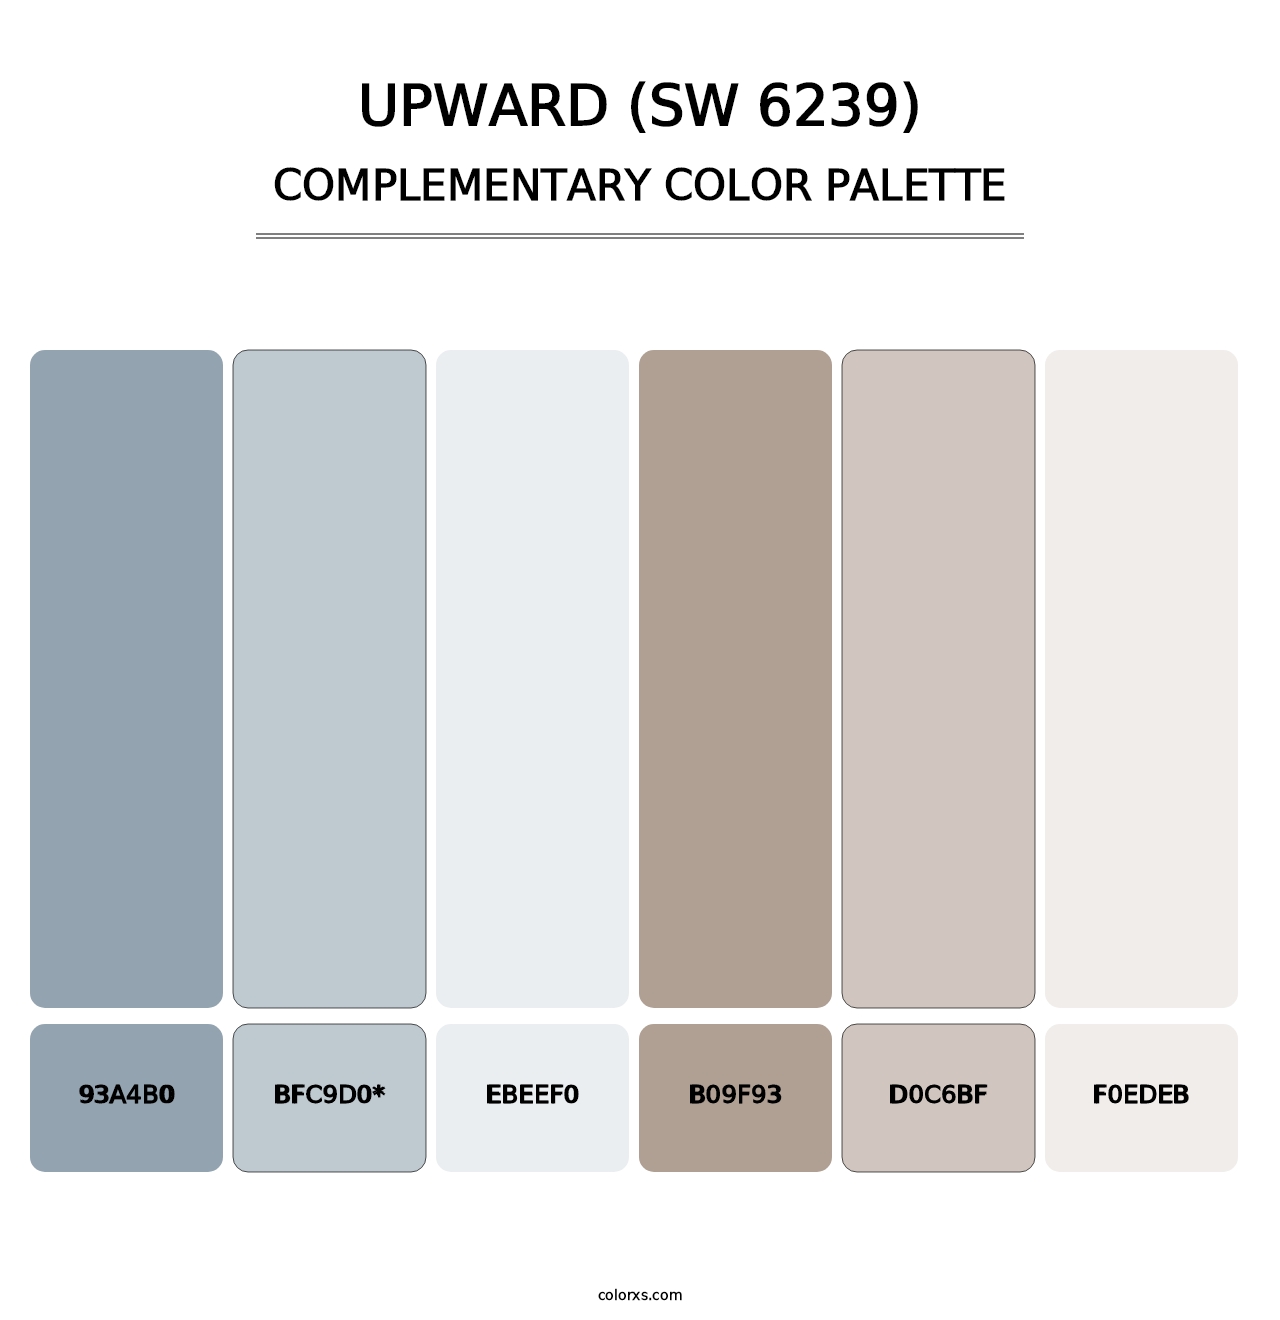 Upward (SW 6239) - Complementary Color Palette